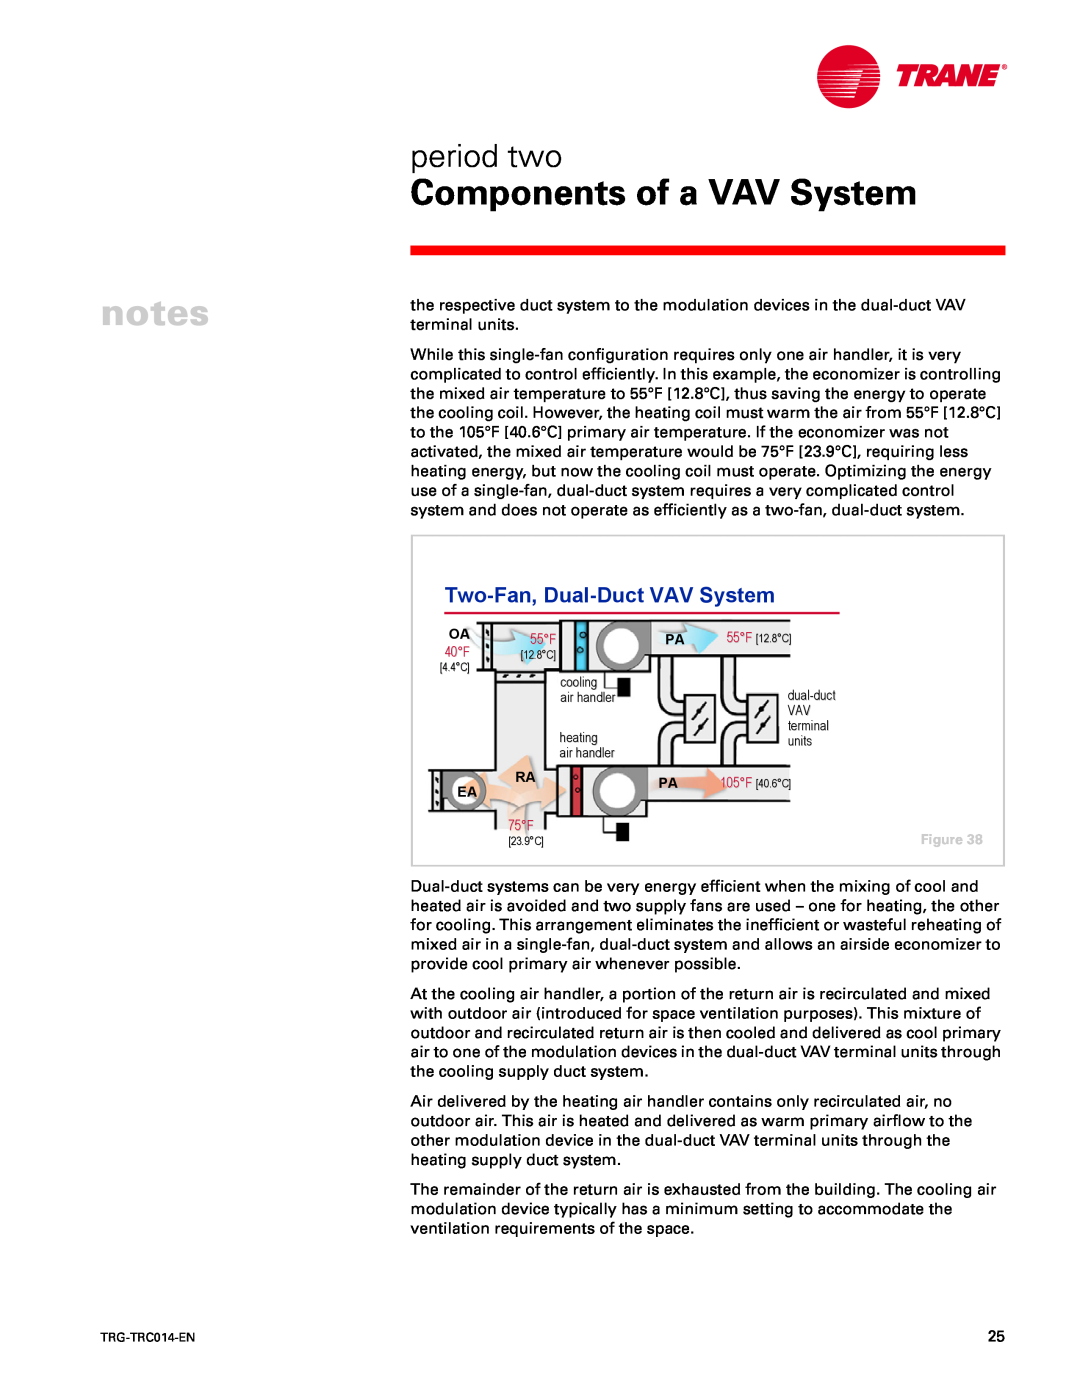 Trane TRG-TRC014-EN manual Two-Fan, Dual-DuctVAV System, Components of a VAV System, period two 